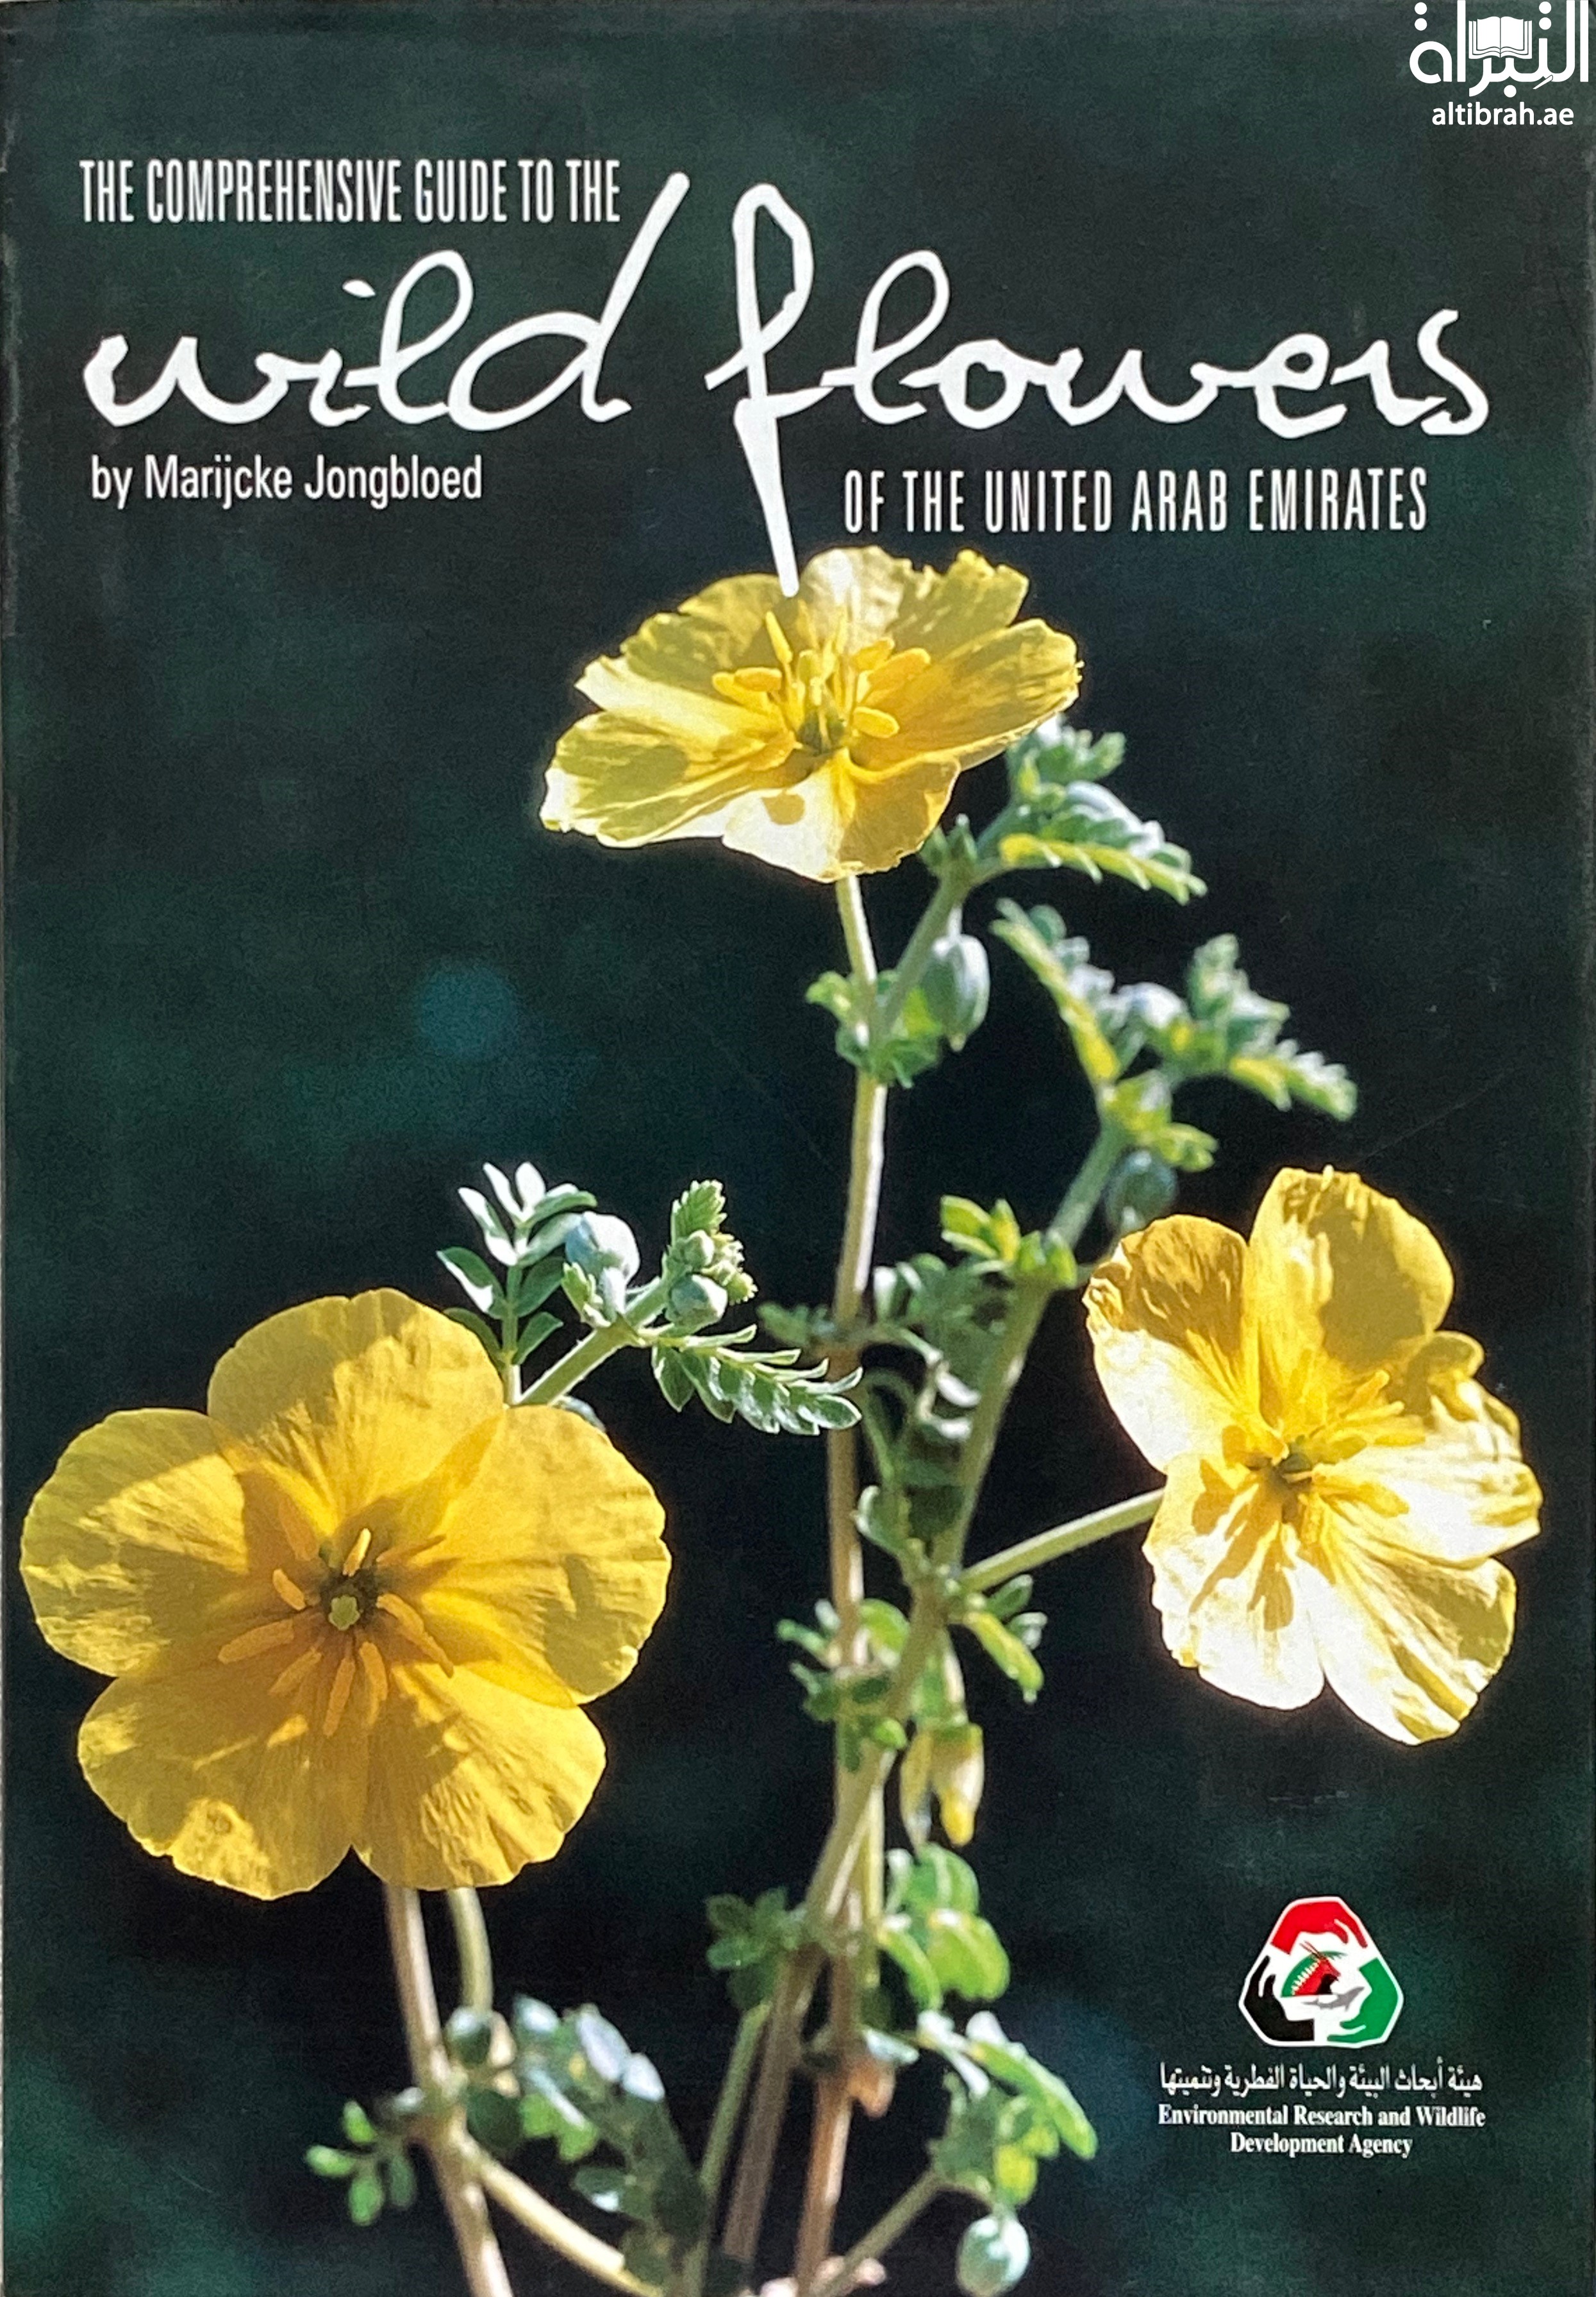 The comprehensive guide to wild flowers of the United Arab Emirates